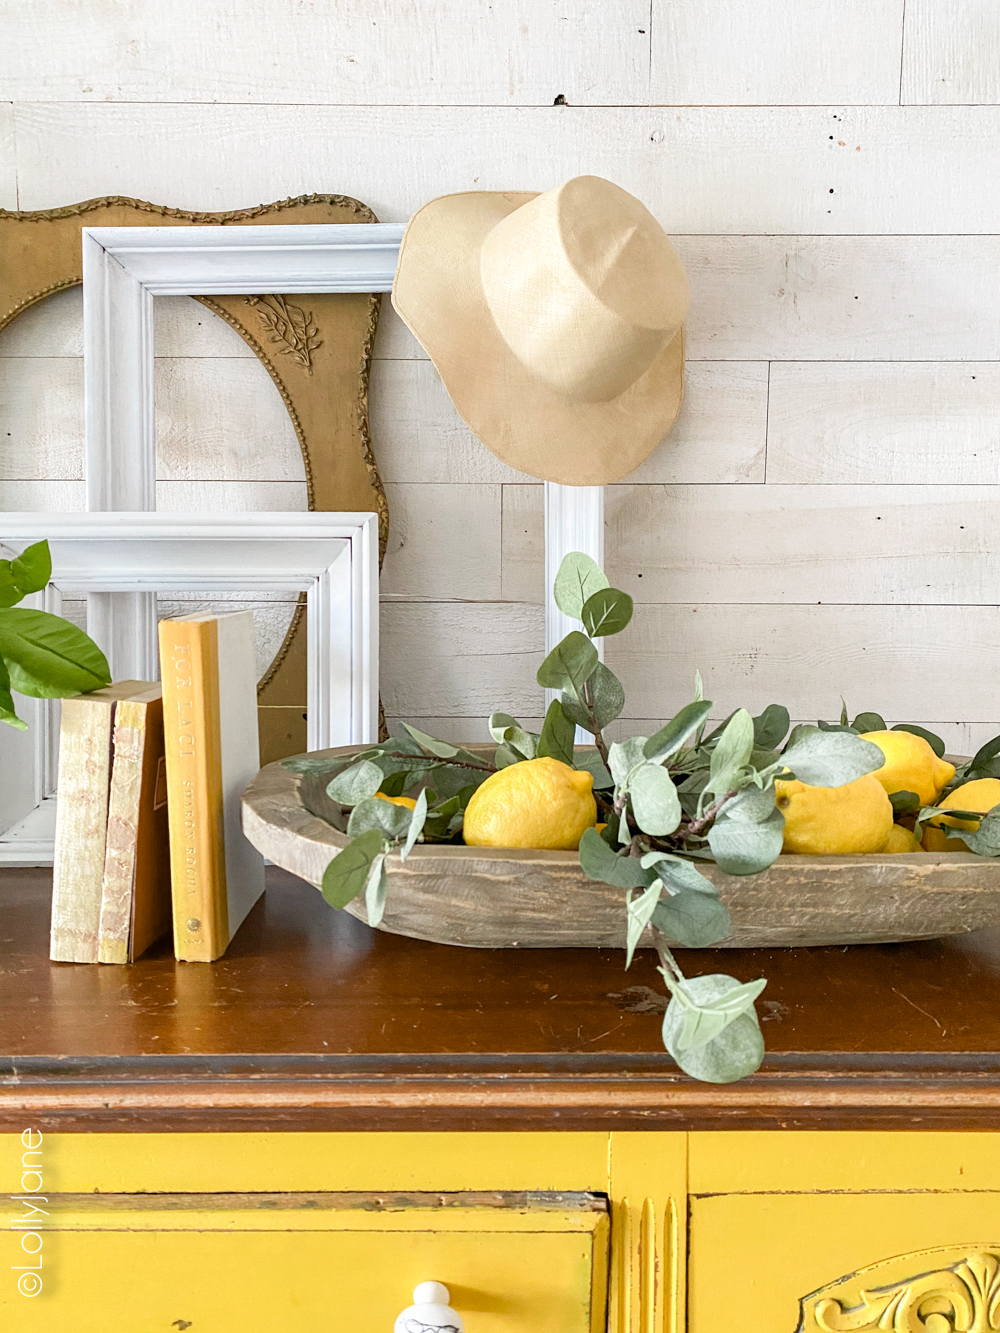 Welcome summer with these EASY entryway decor tips! #entryway #mantel #summerdecor #summertime #summerhomedecor #lemons #lemondecor #lemonhomedecor #yellowbuffet